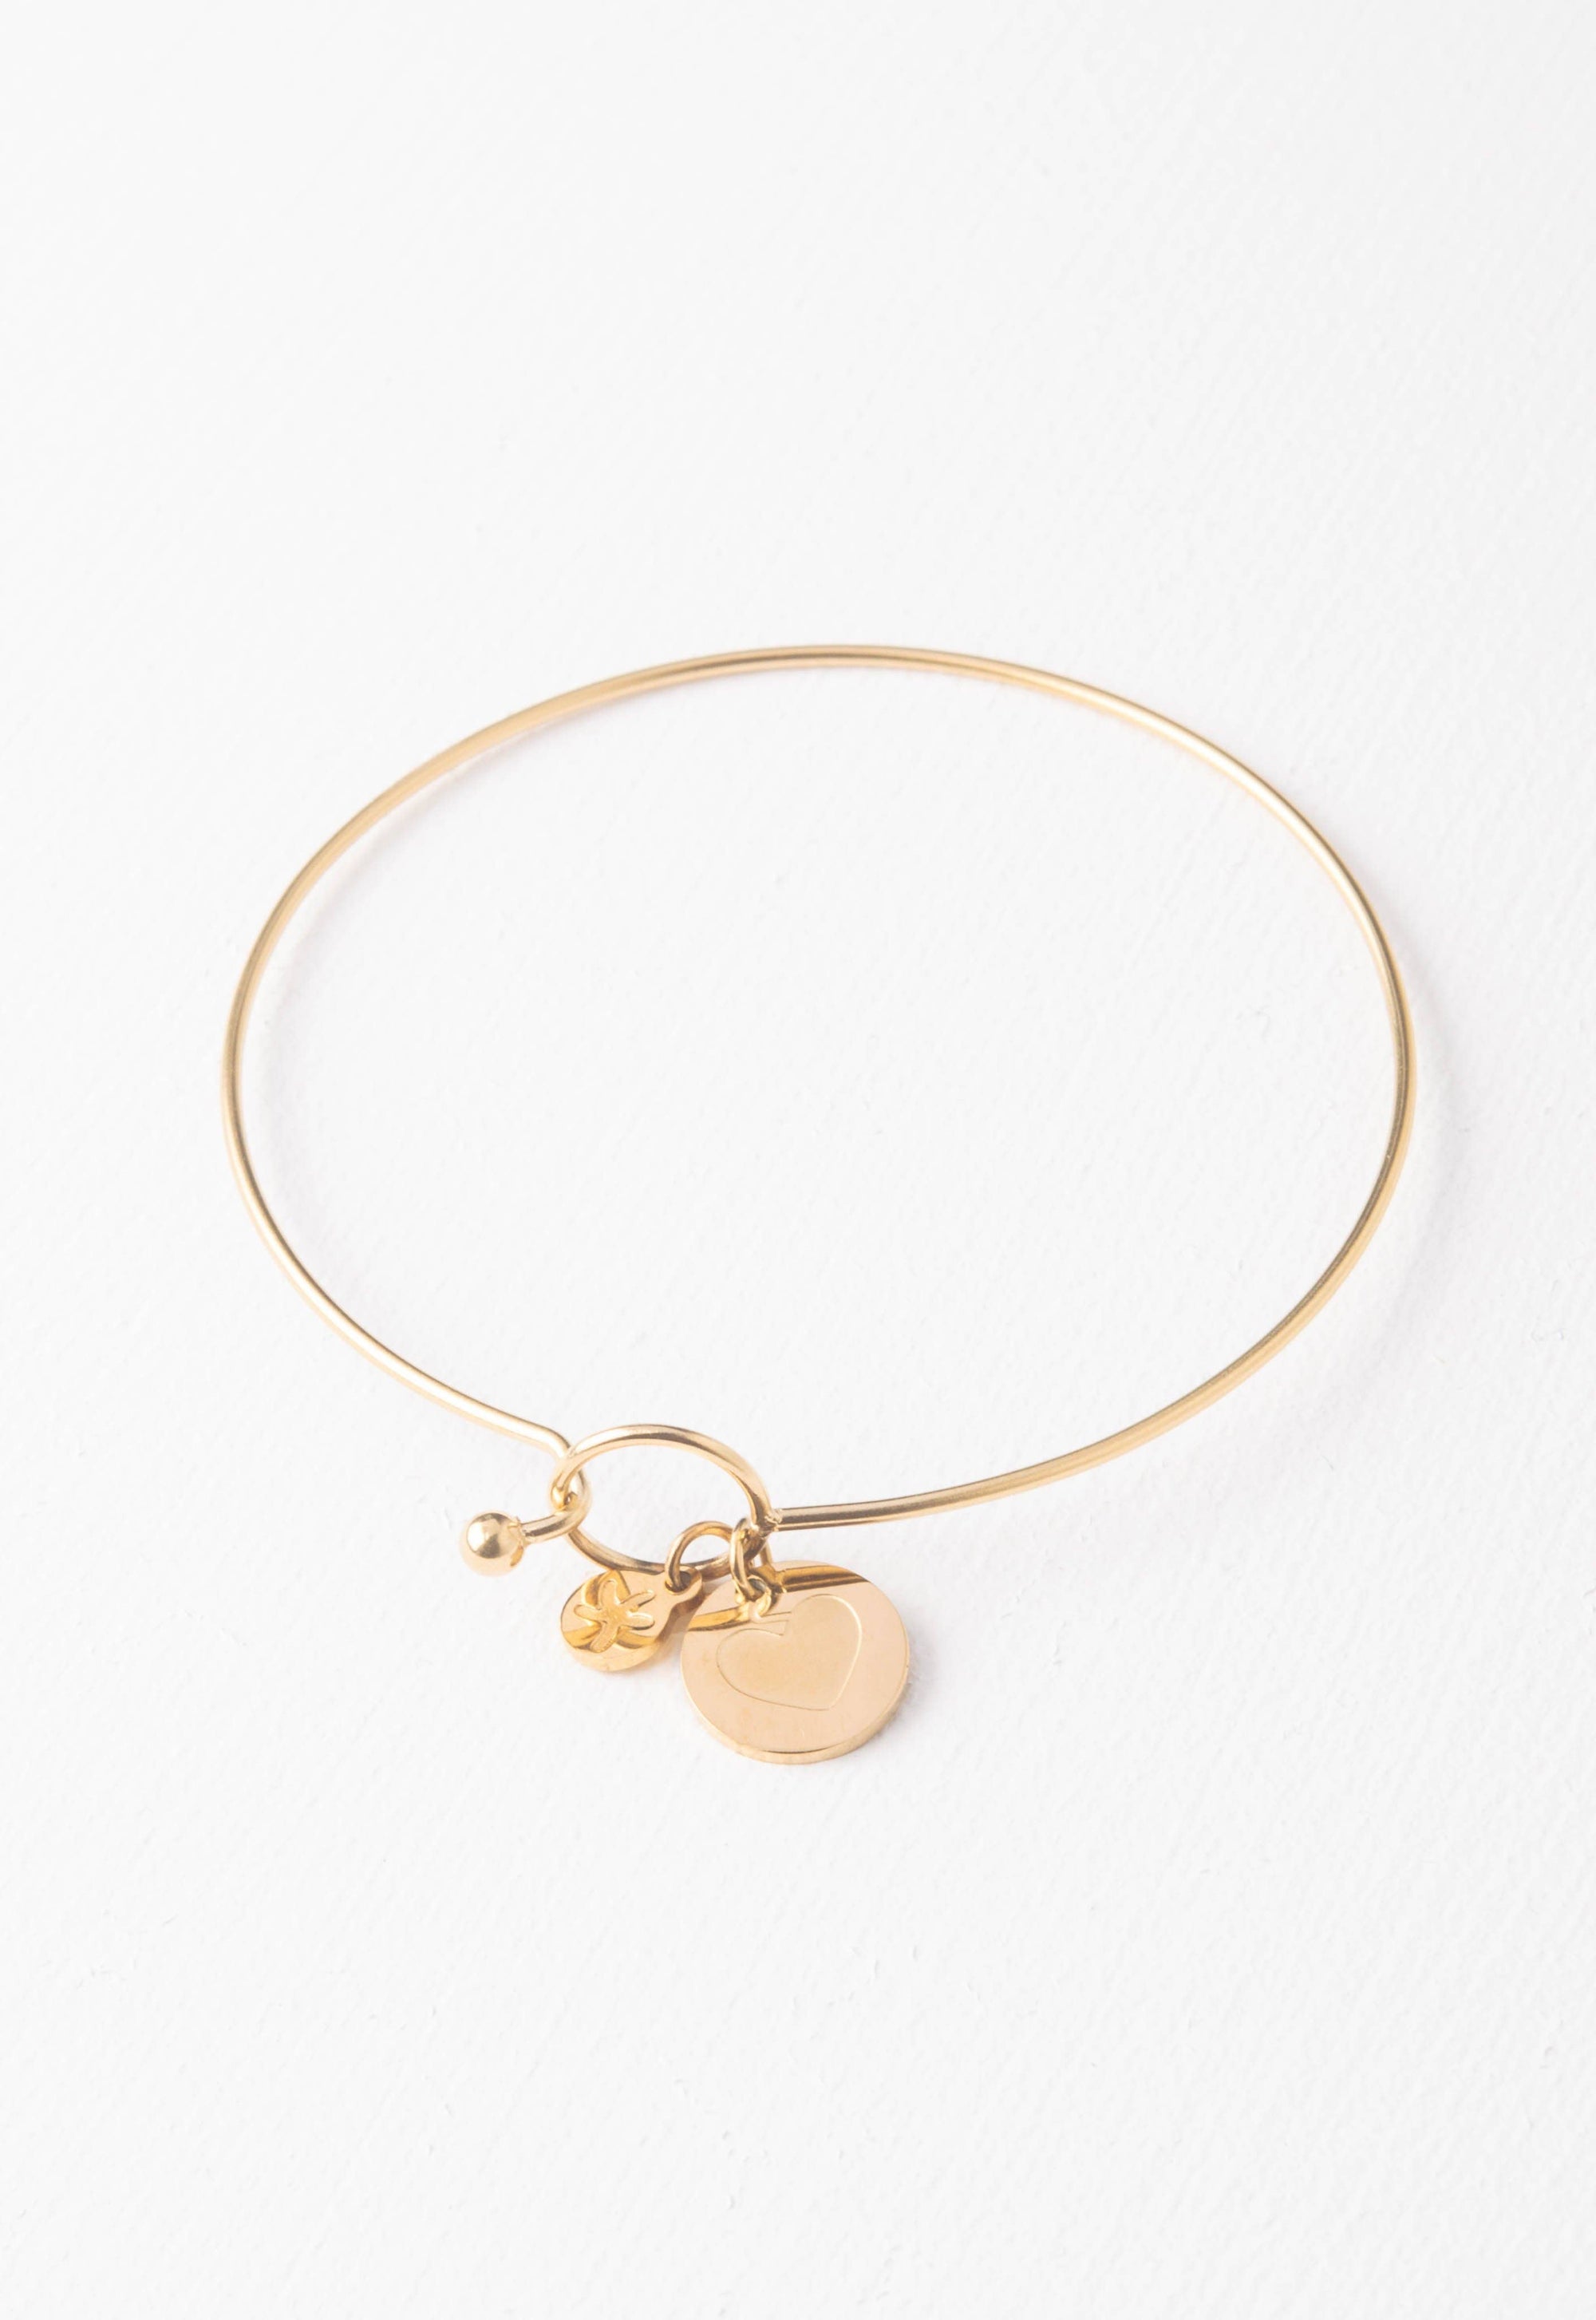 Starfish Project's Forever Bracelet